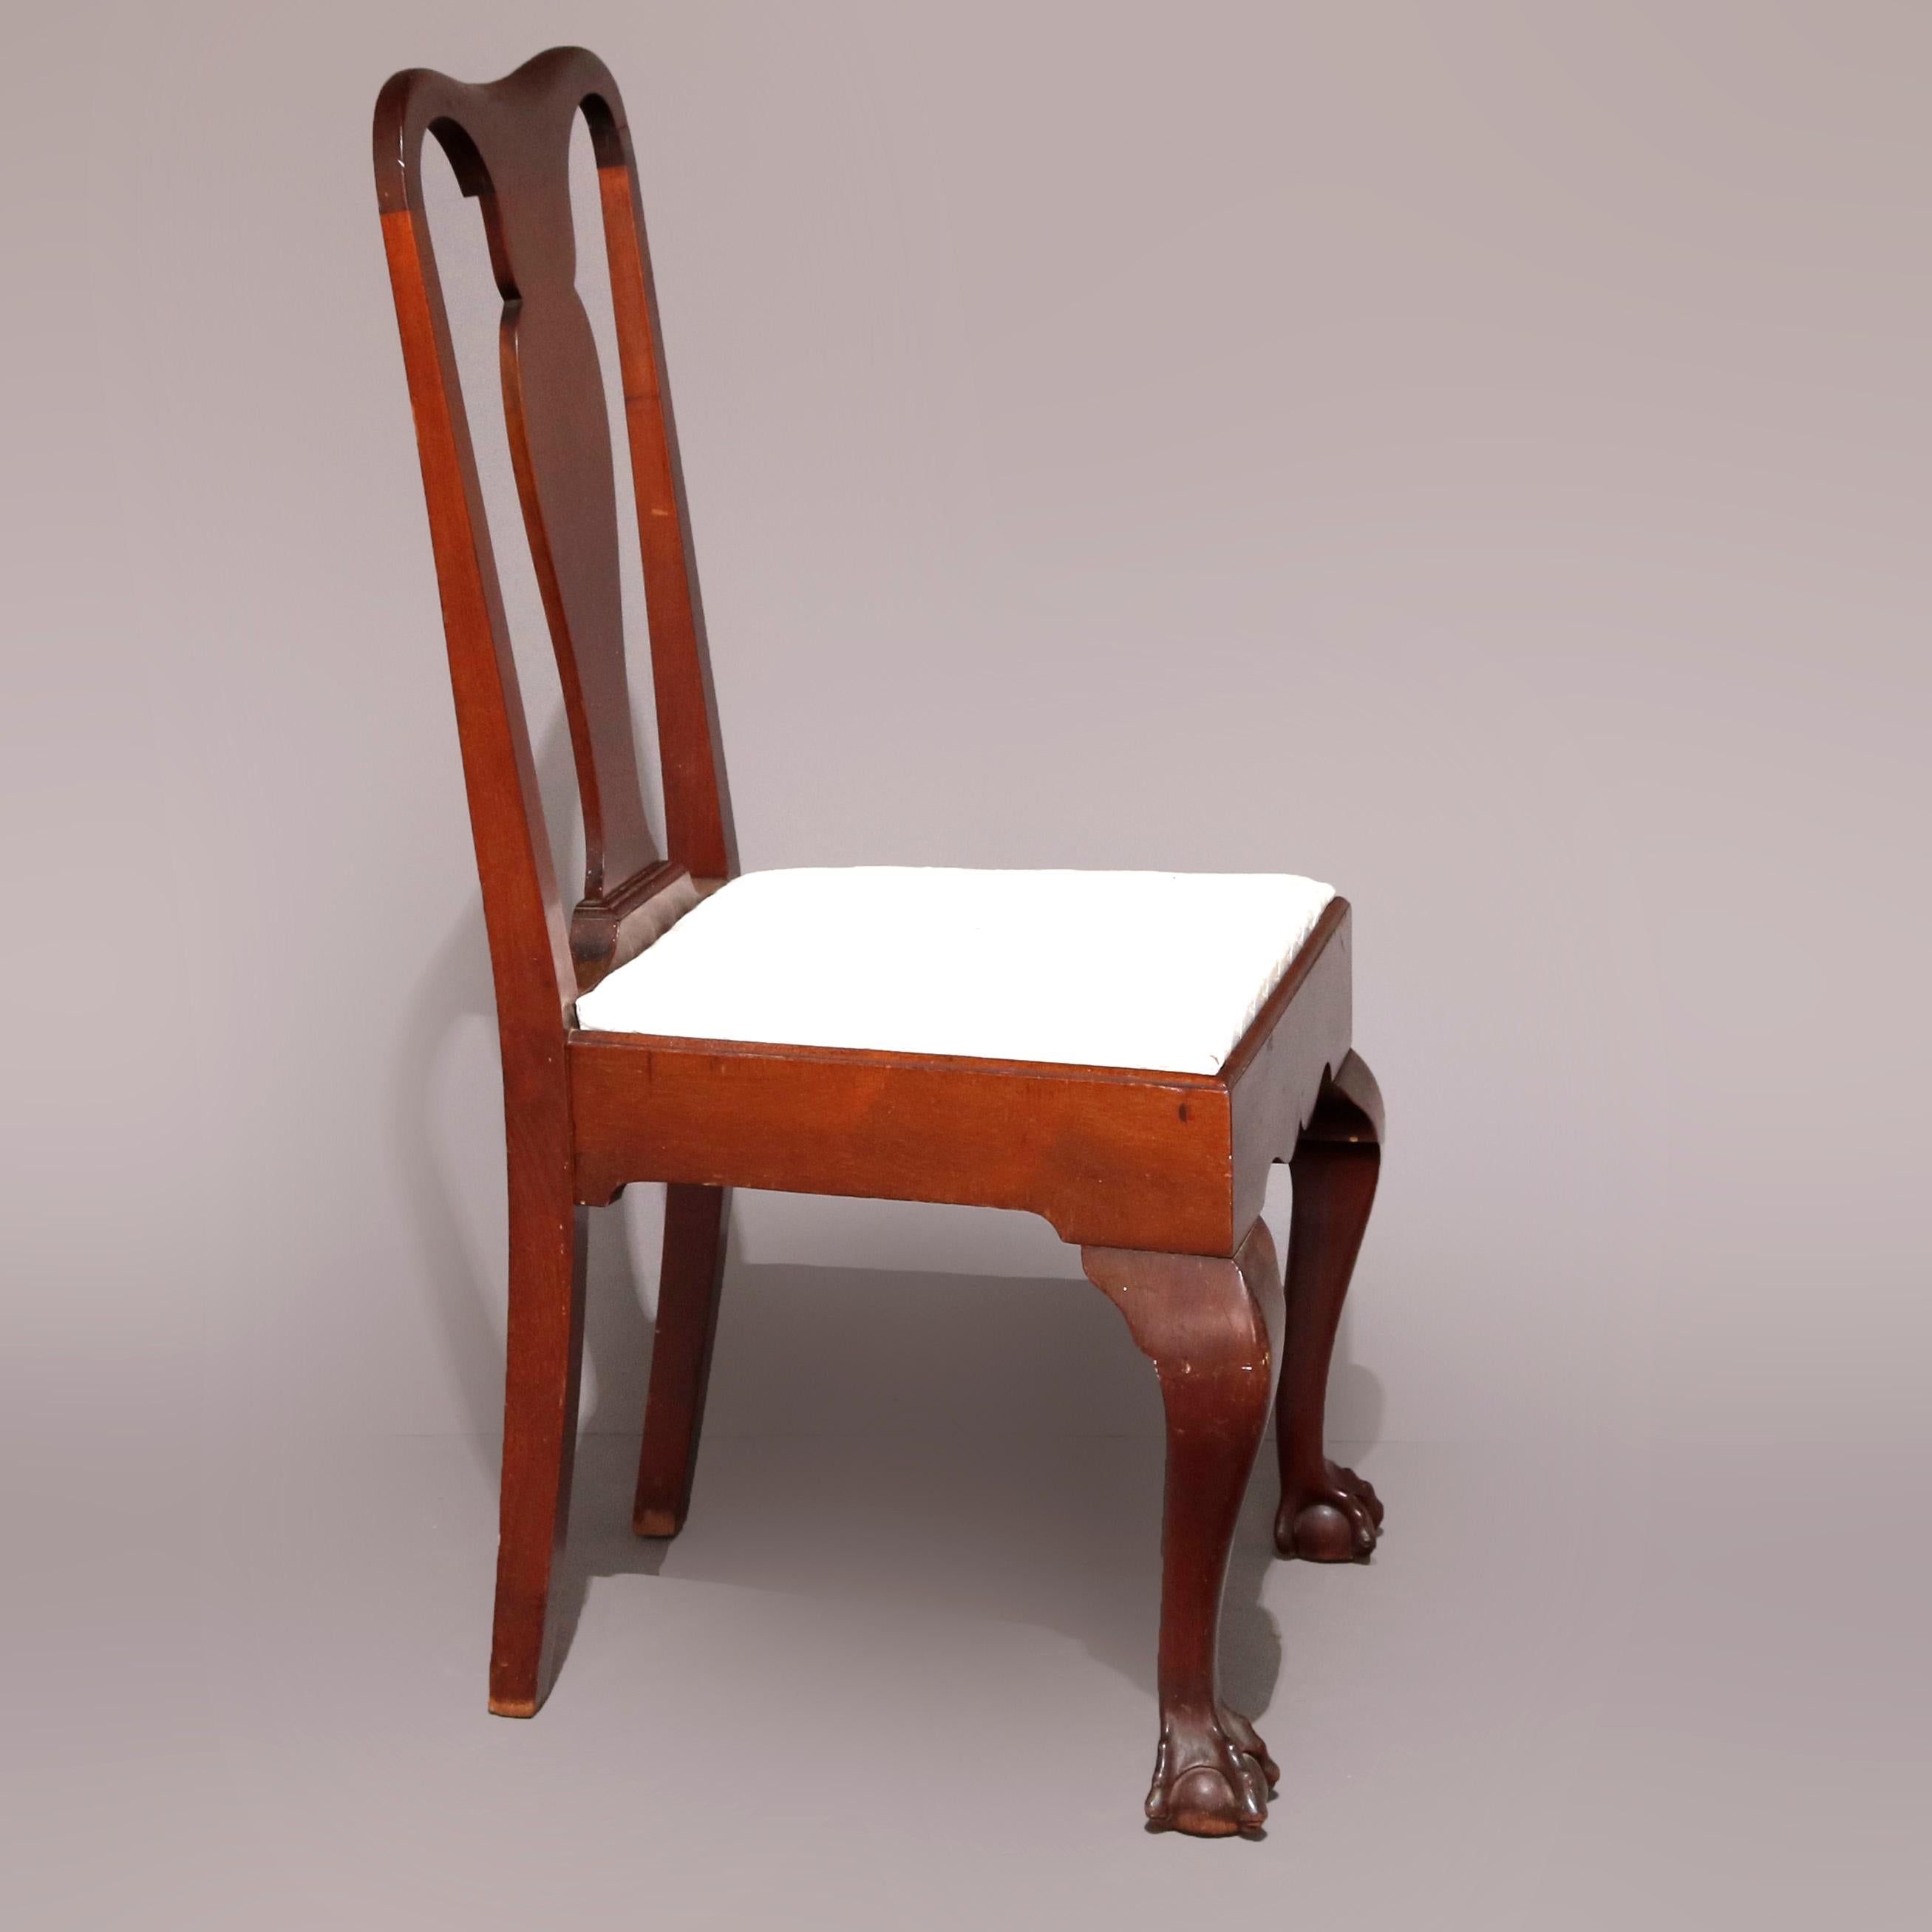 An antique set of 10 American Empire dining chairs offers mahogany construction with slat backs surmounting upholstered seats and raised on cabriole legs terminating in claw and ball feet, circa 1900.

Measures - 40